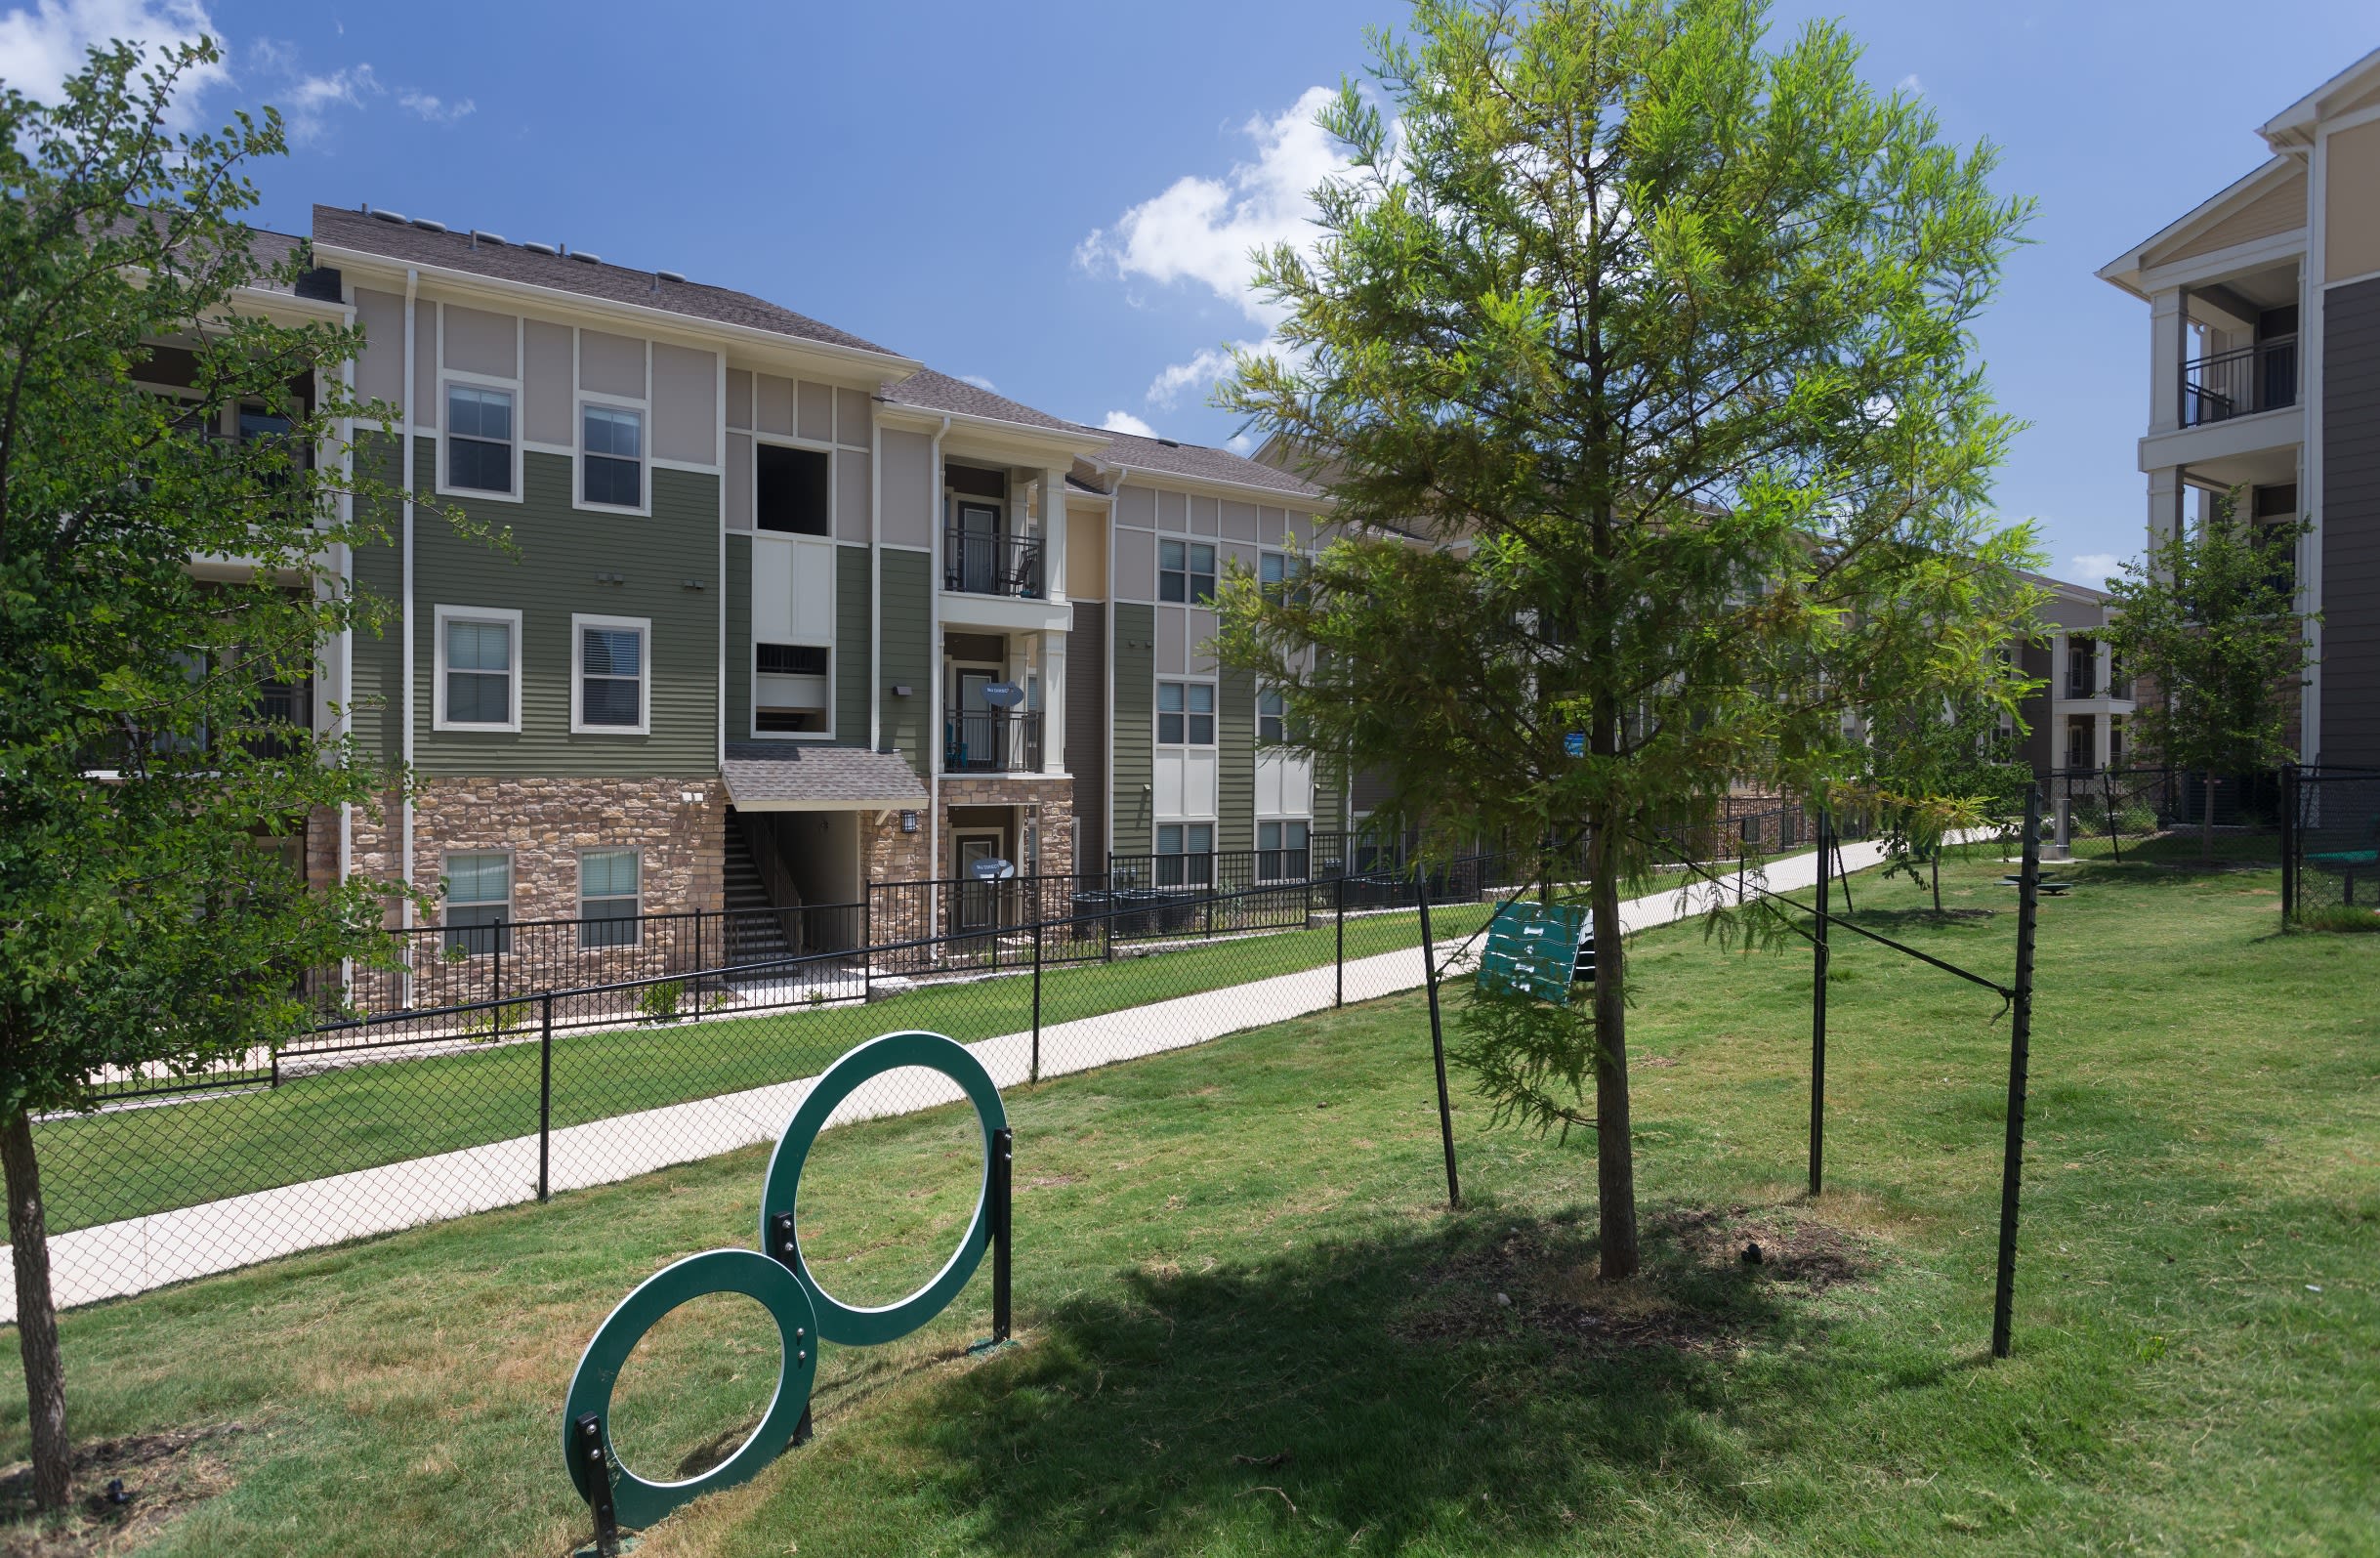 Sprawling green lawn and trees outside Encore 281 in San Antonio, Texas